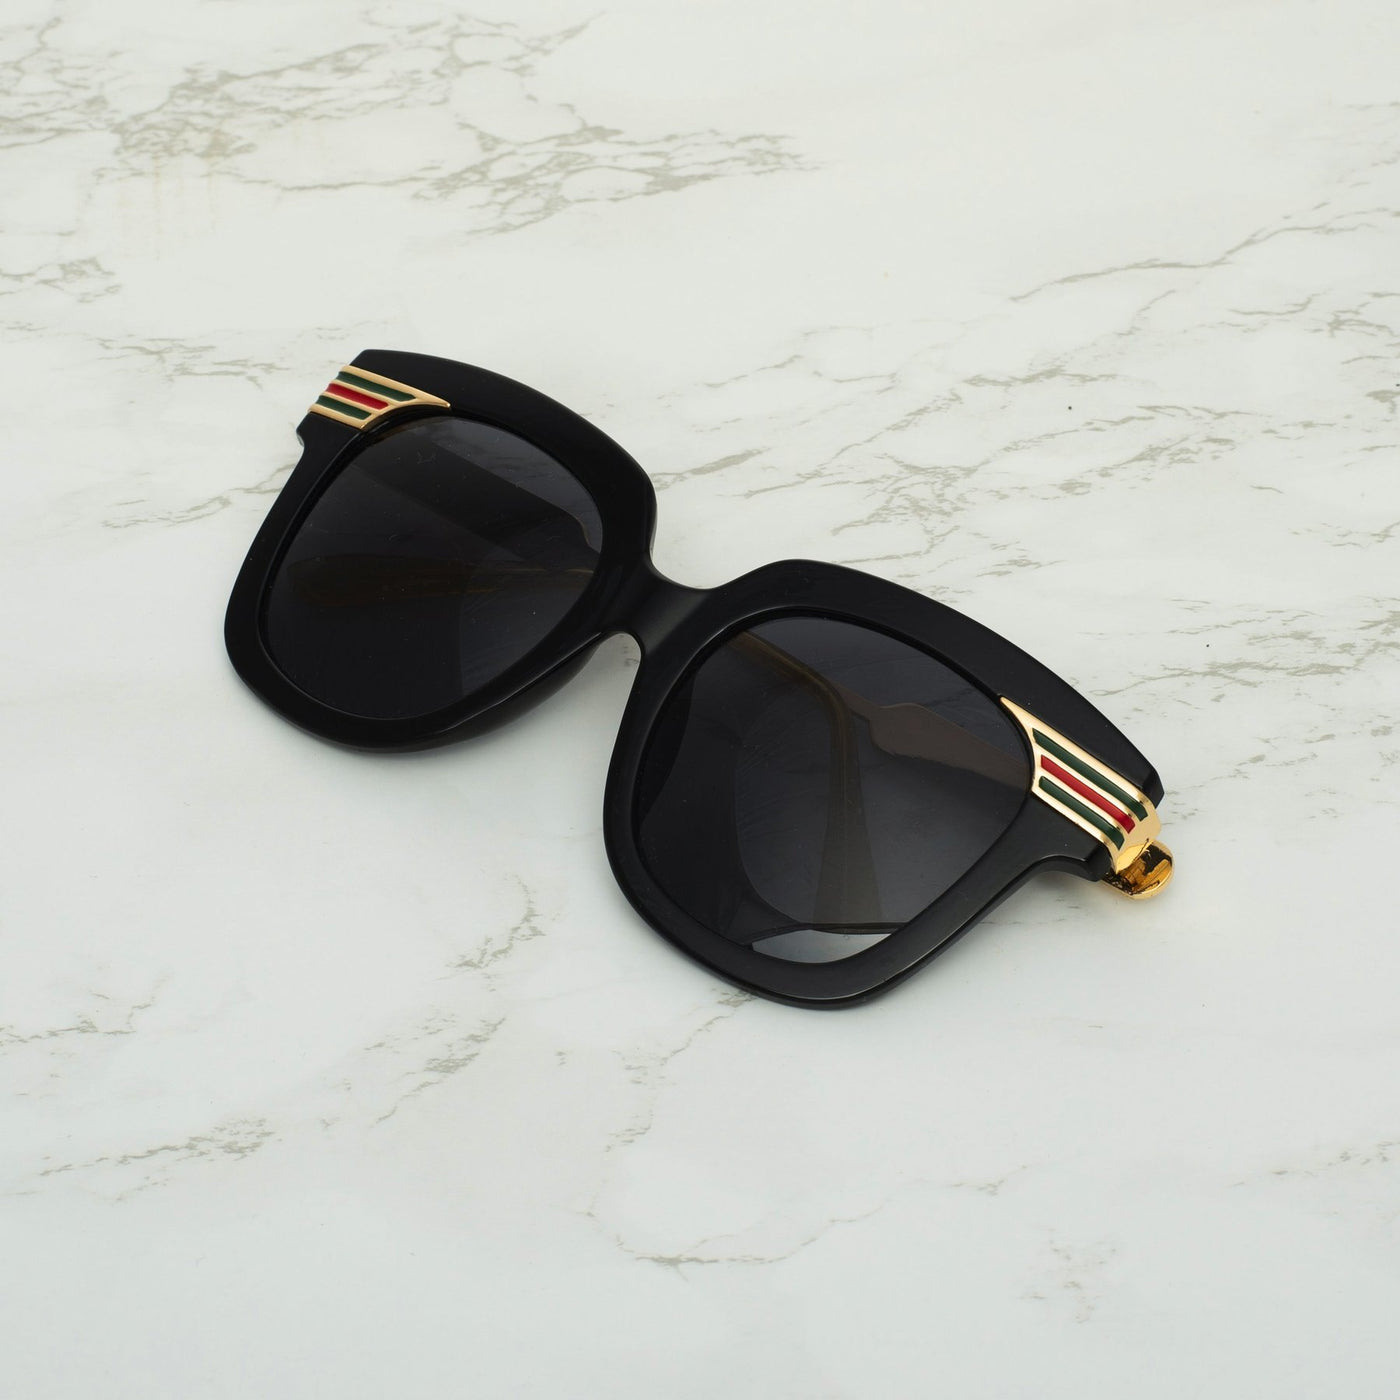 Rectangle Black And Black Gold Sunglasses For Men And Women-Unique and Classy